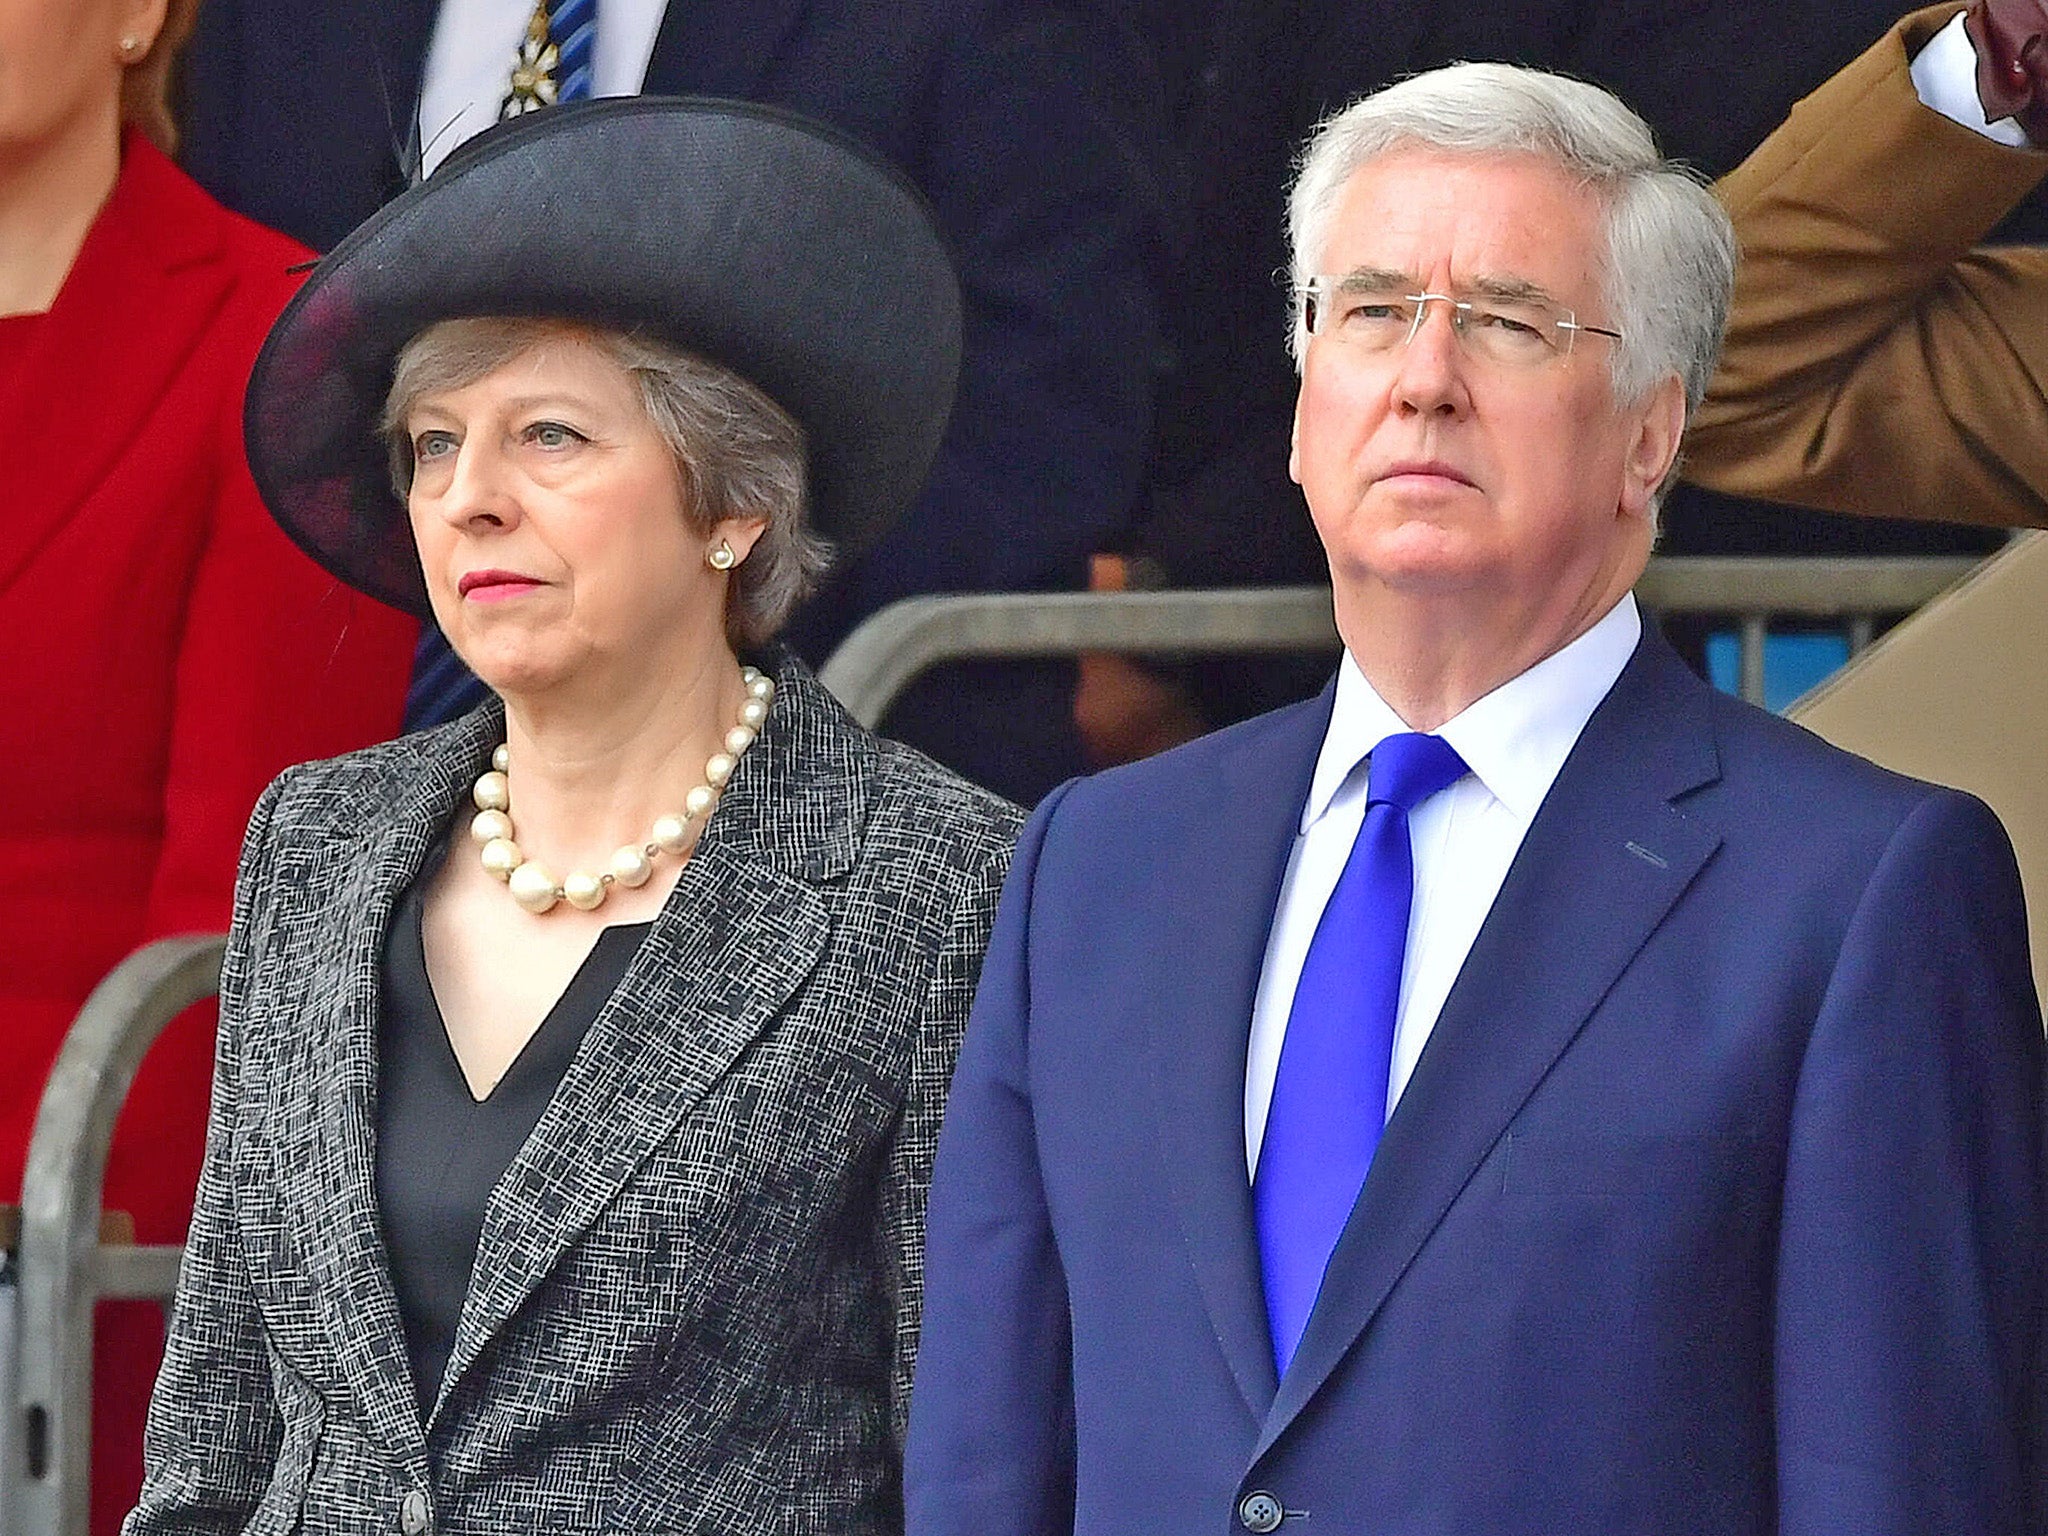 The resignation of Sir Michael Fallon – which was either forced or voluntary depending on which account to believe – would not have happened in past times